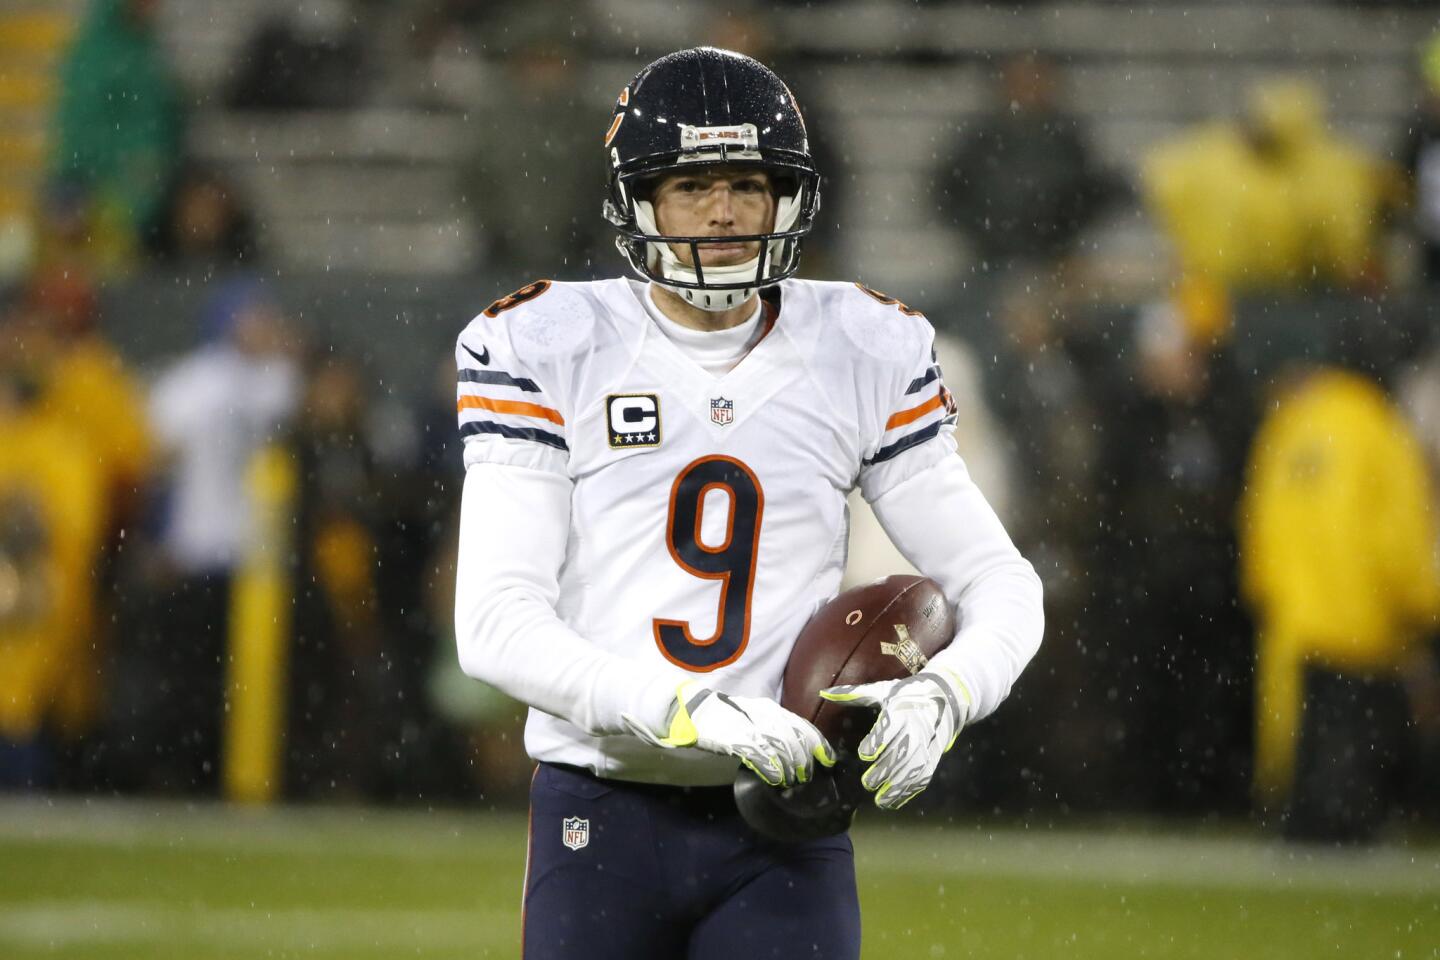 Robbie Gould during warm-ups as the rain comes down before facing the Packers at Lambeau Field.